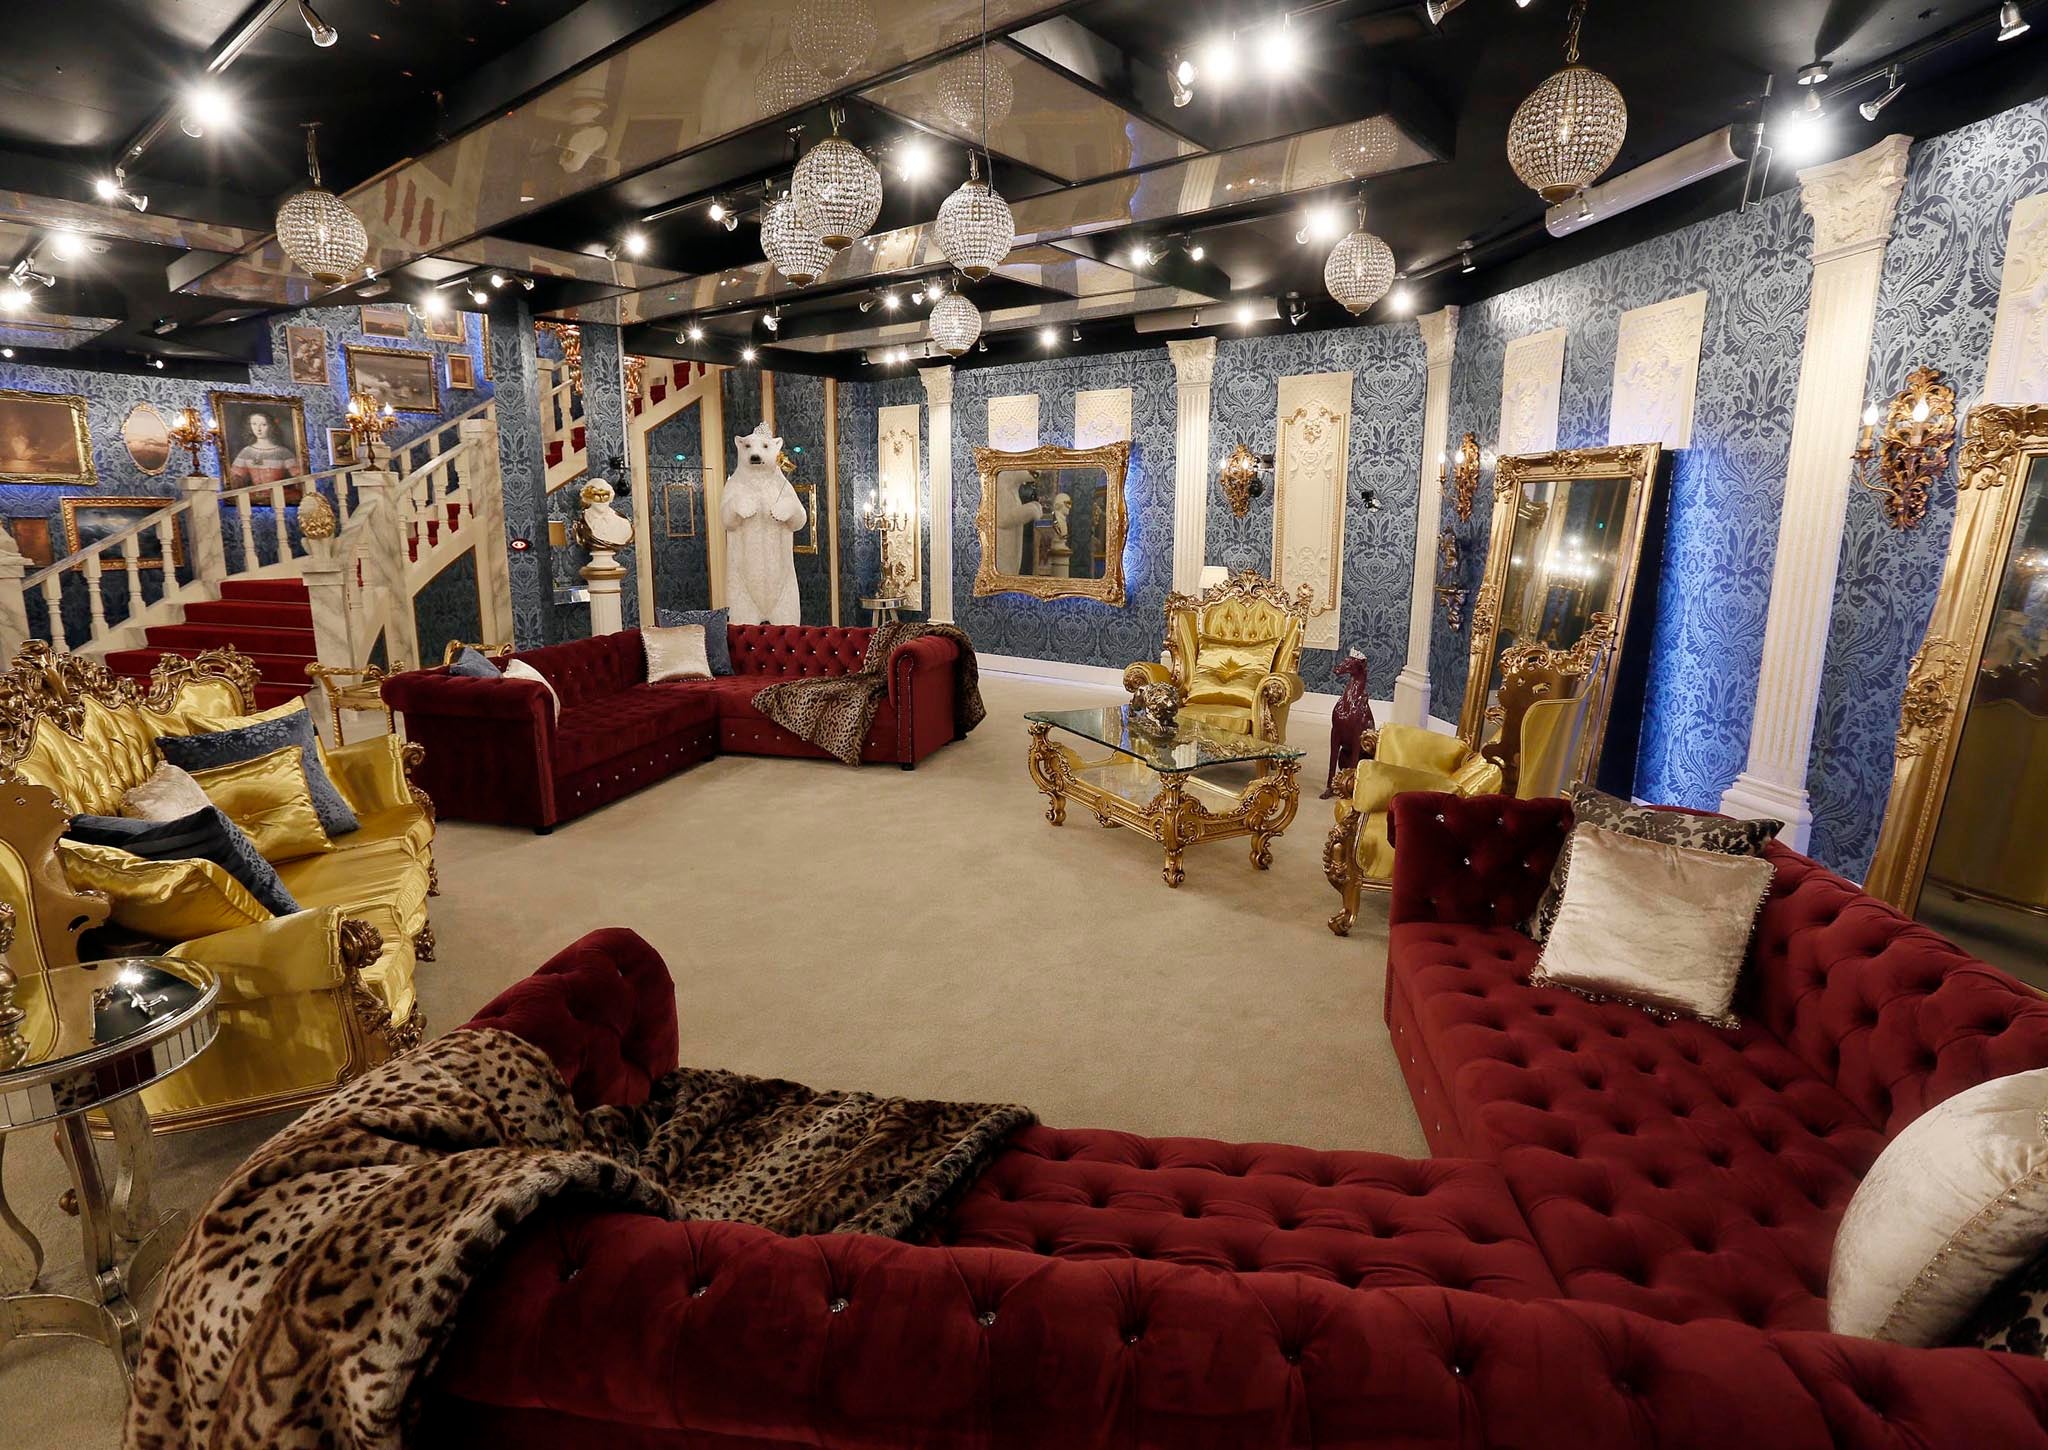 Coming soon: Celebrity Big Brother 2014